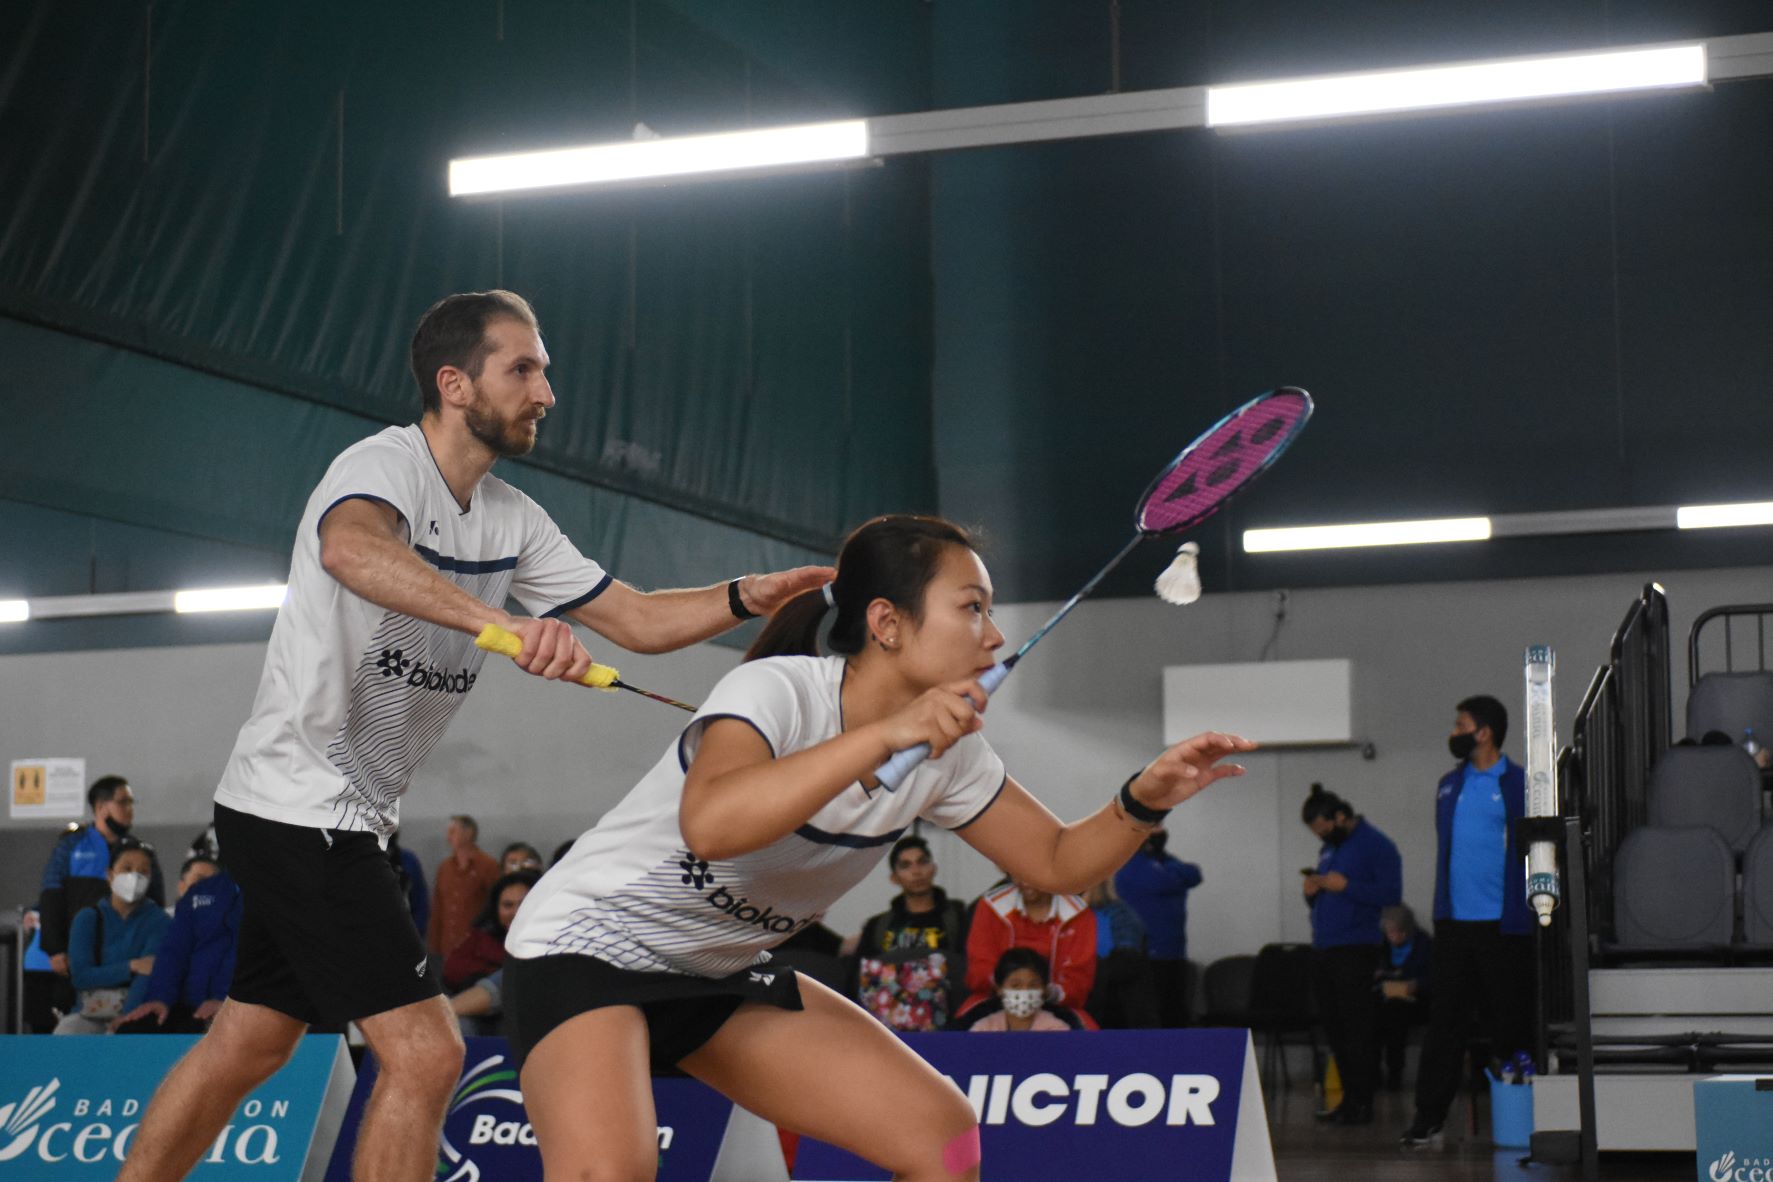 Oliver and Anona named in the New Zealand Team for the Birmingham 2022 Commonwealth Games